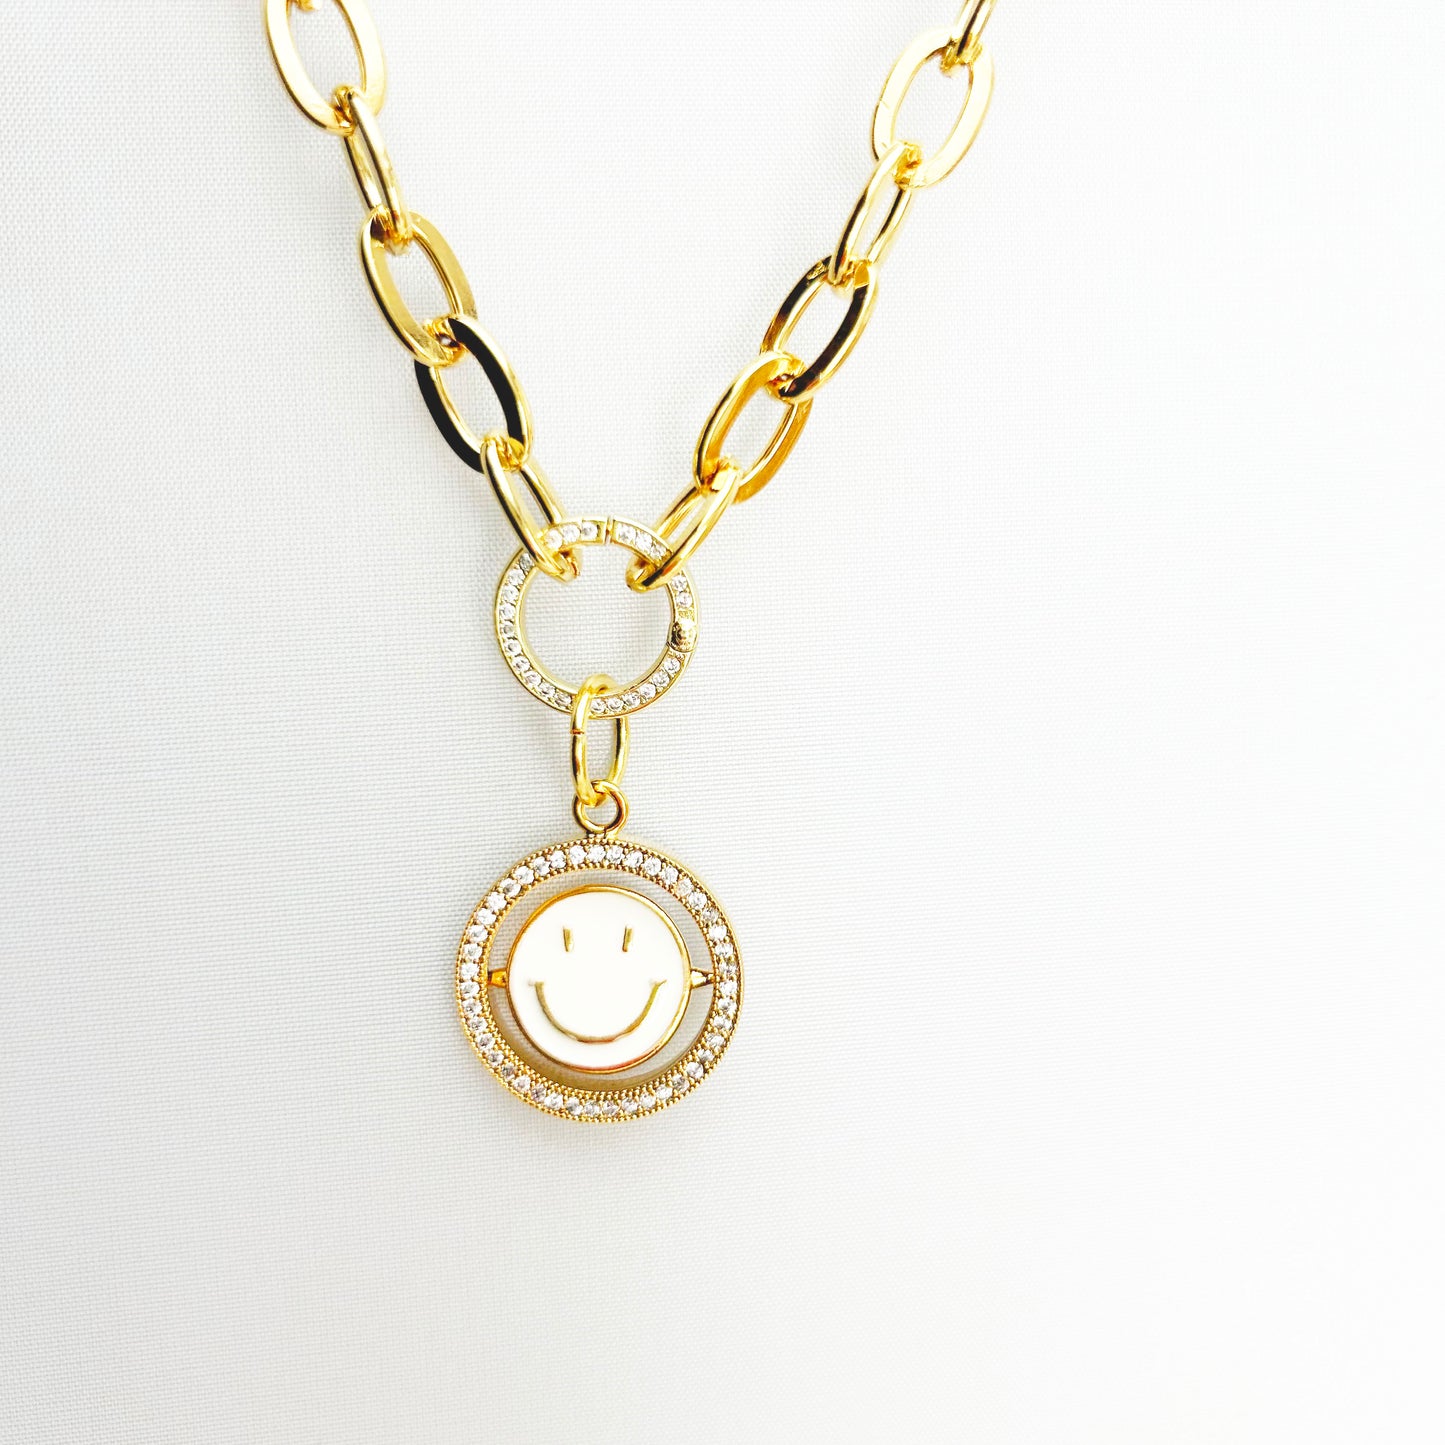 Sparkly Smiley Face Necklace | Happy Sad Spinner